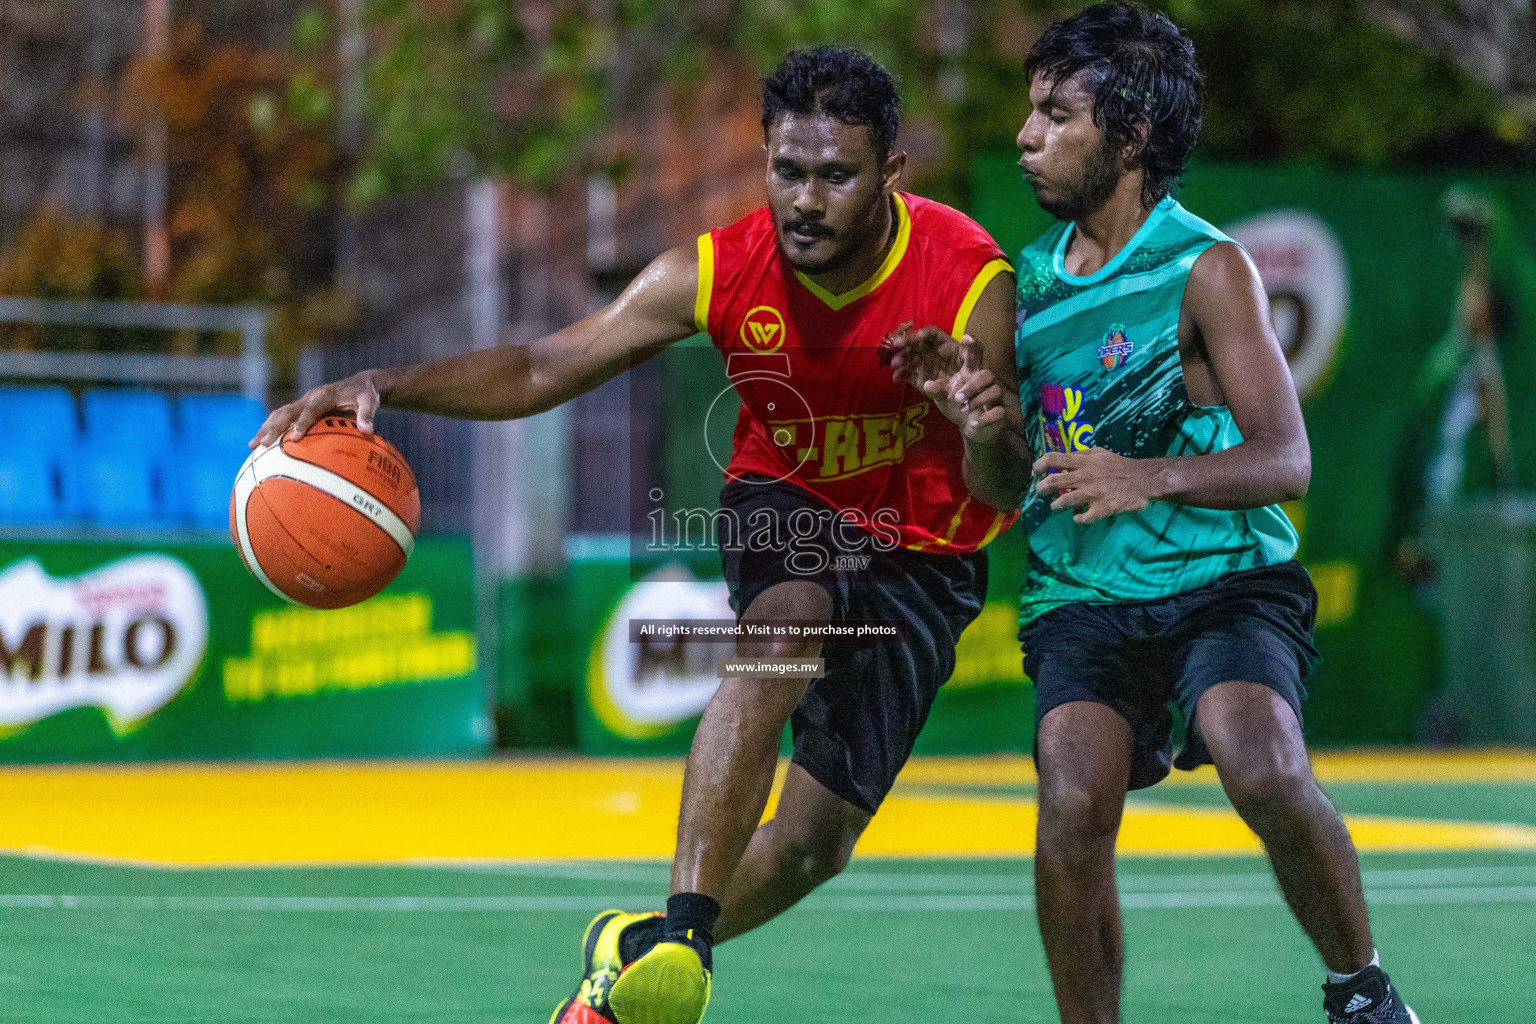 Finals of Weekend League 2021 was held on Monday, 6th December 2021, at Ekuveni Outdoor Basketball court Photos: Ismail Thoriq / images.mv